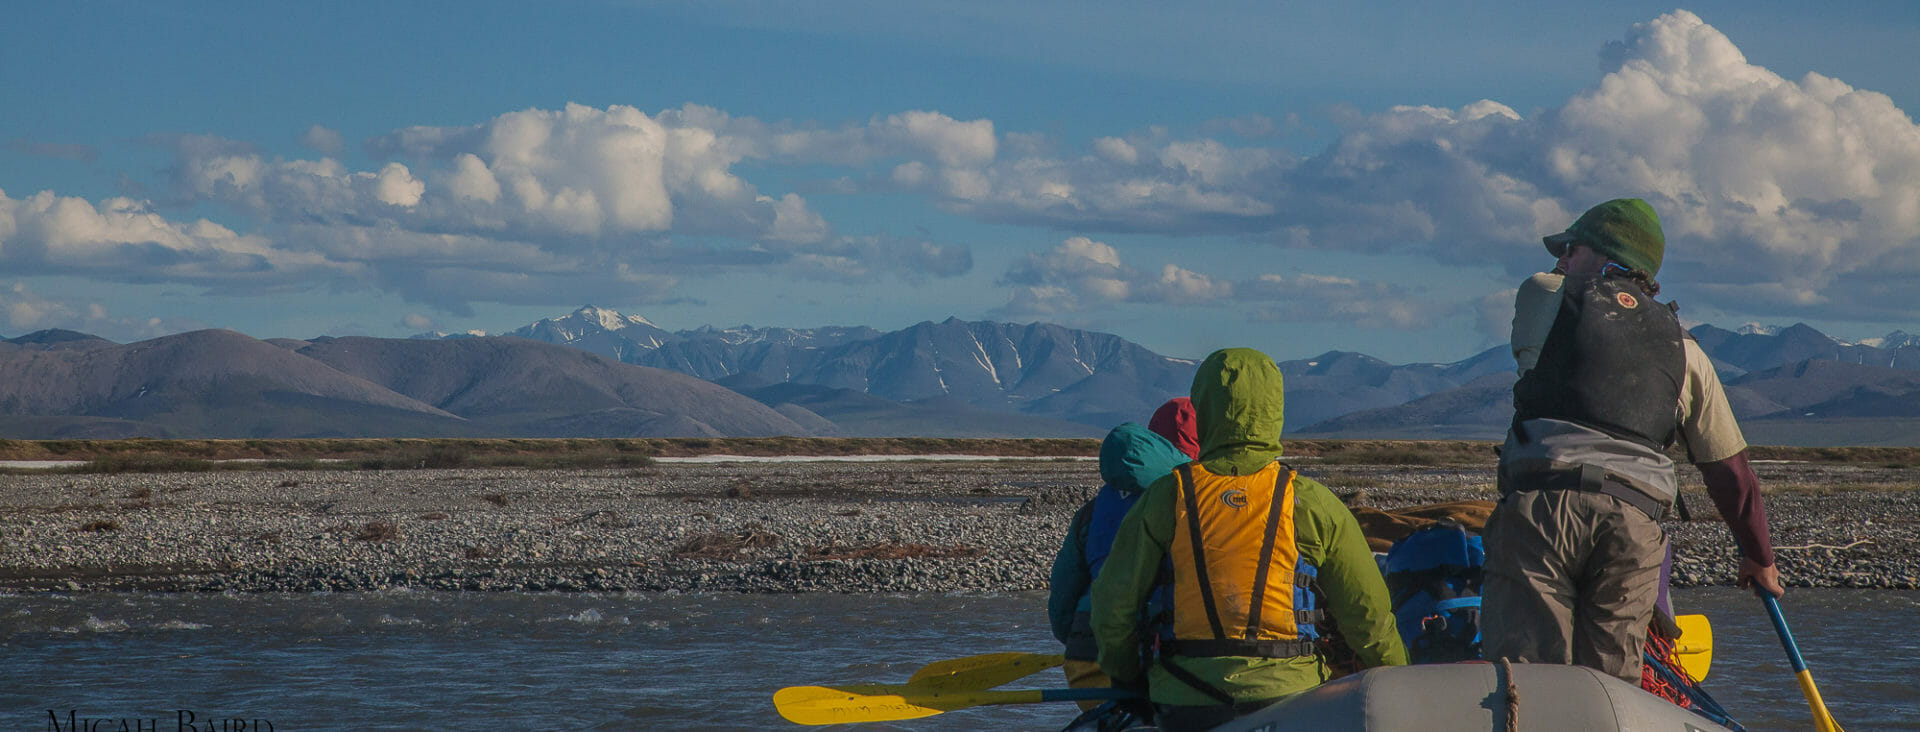 rafting from the Brooks Range in the Arctic Refuge. Micah Baird Photo.